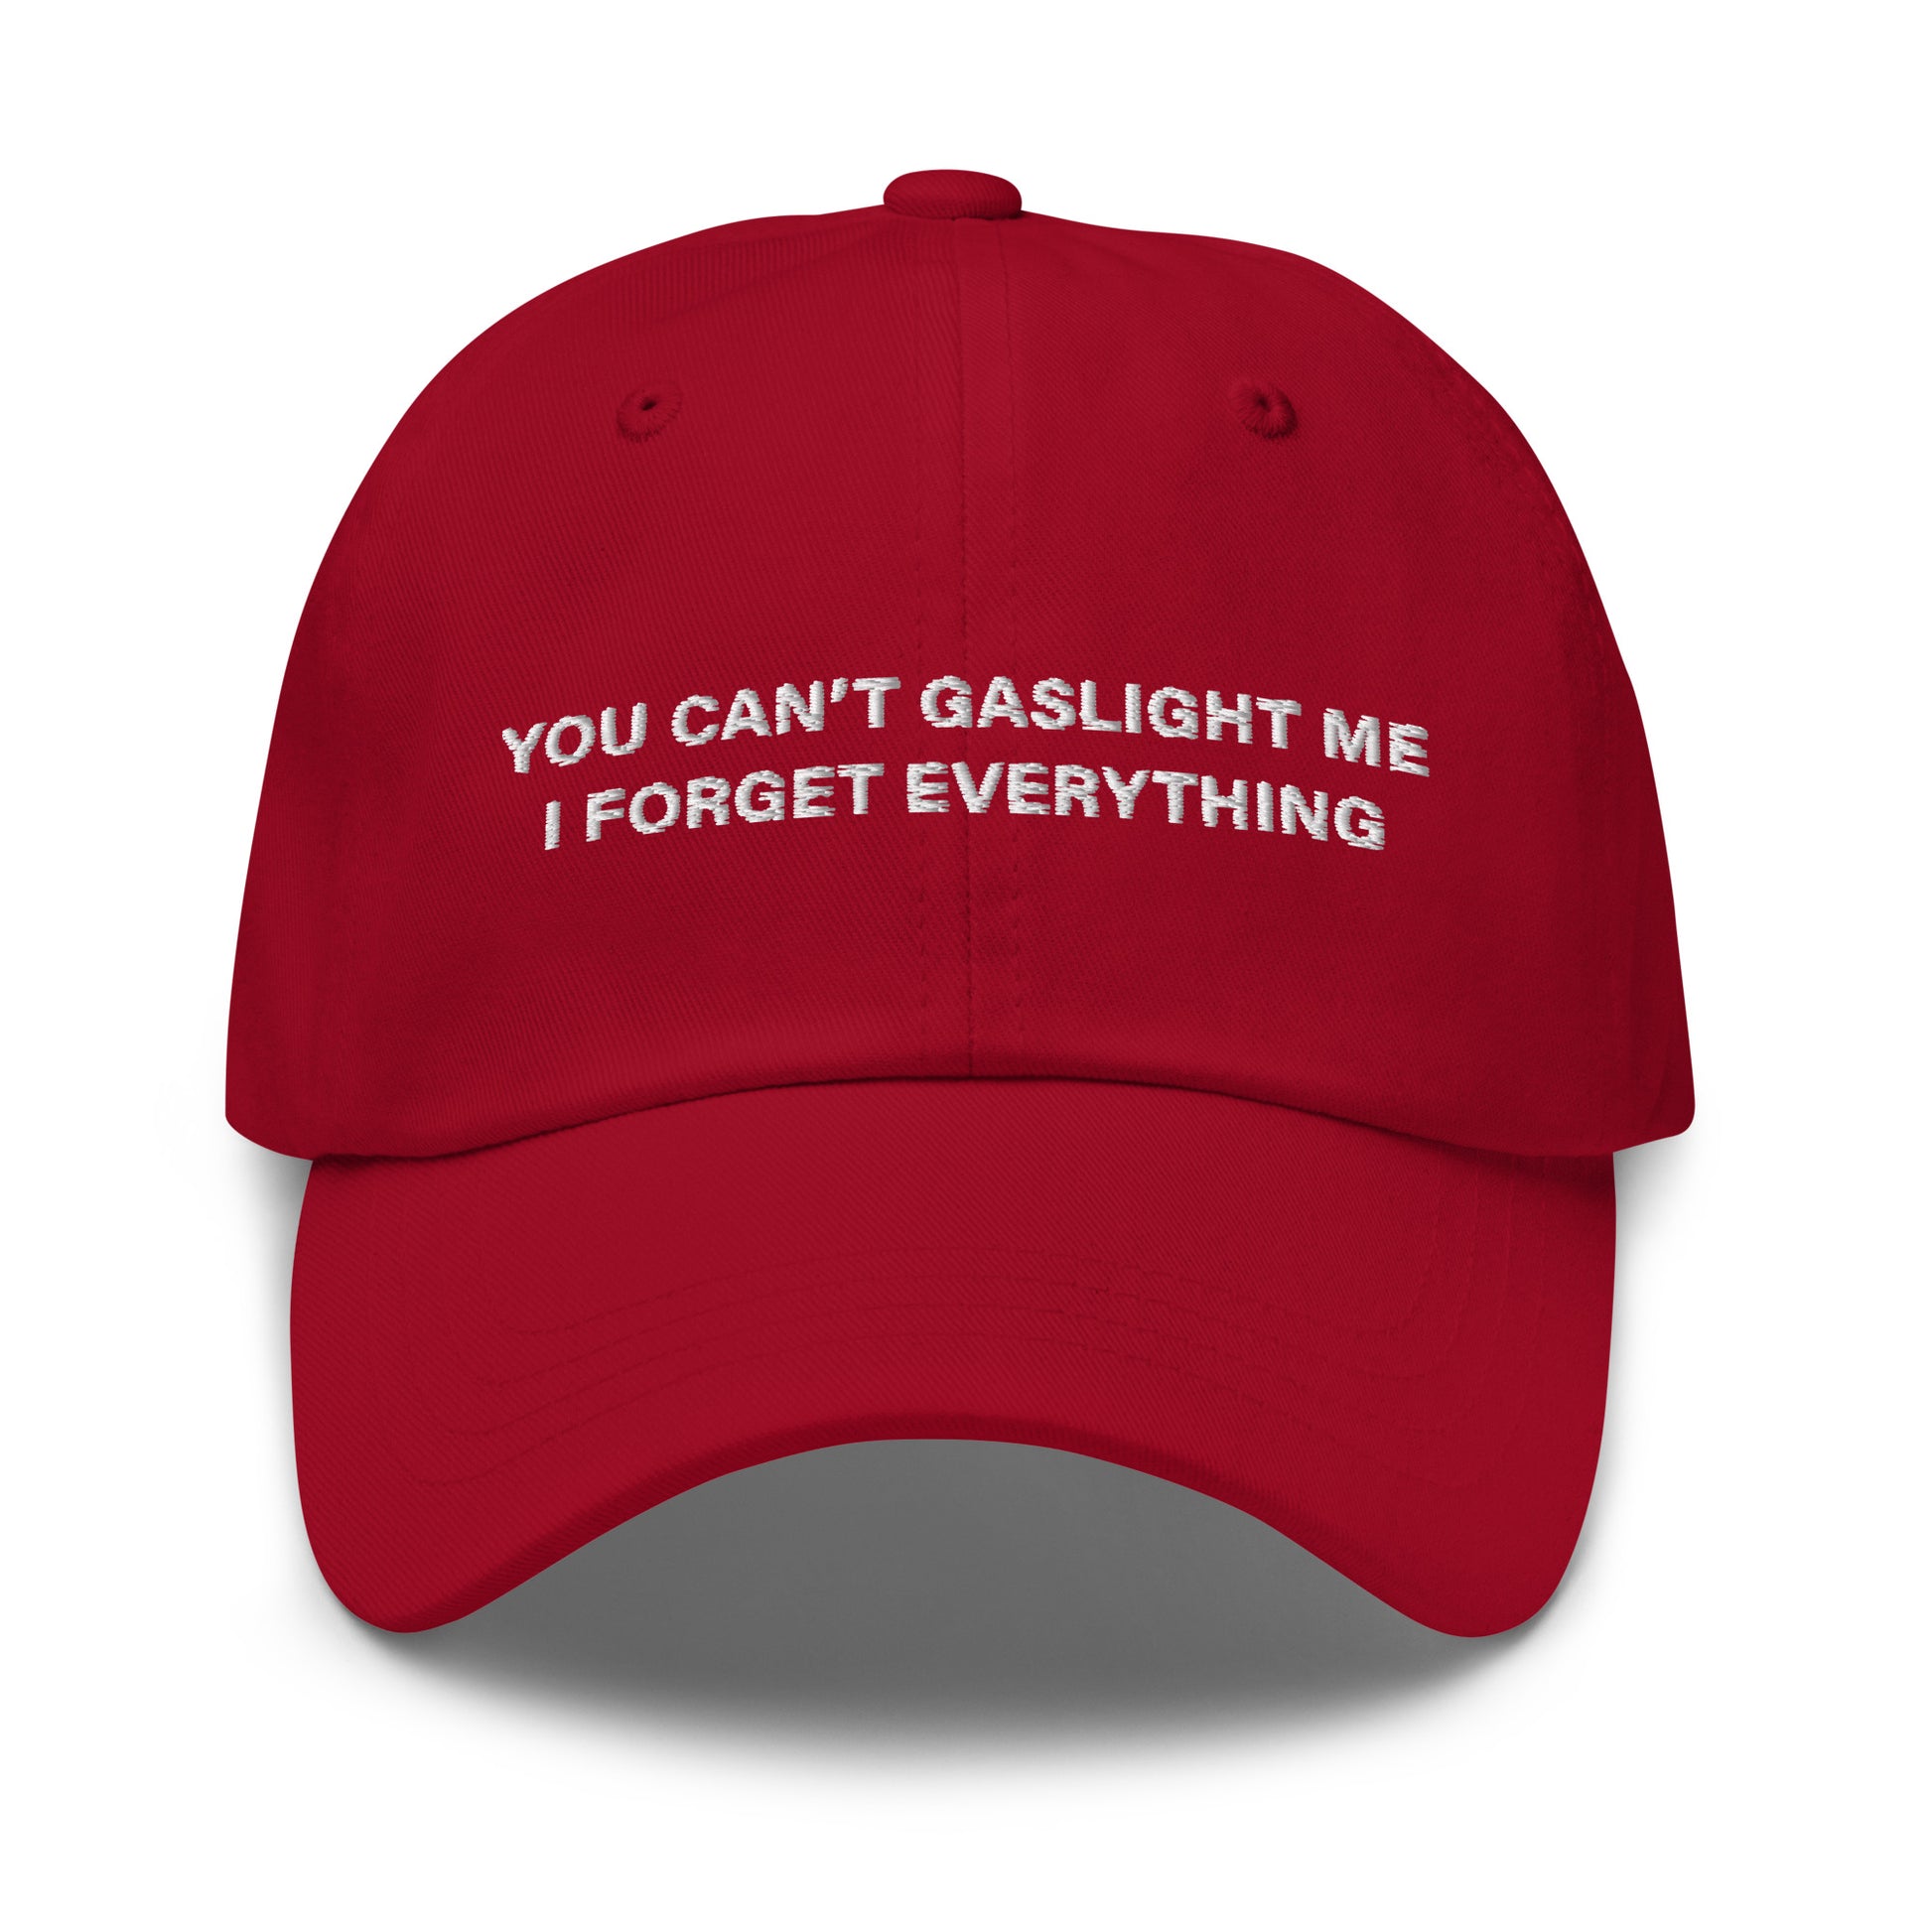 You Can't Gaslight Me hat – Got Funny?